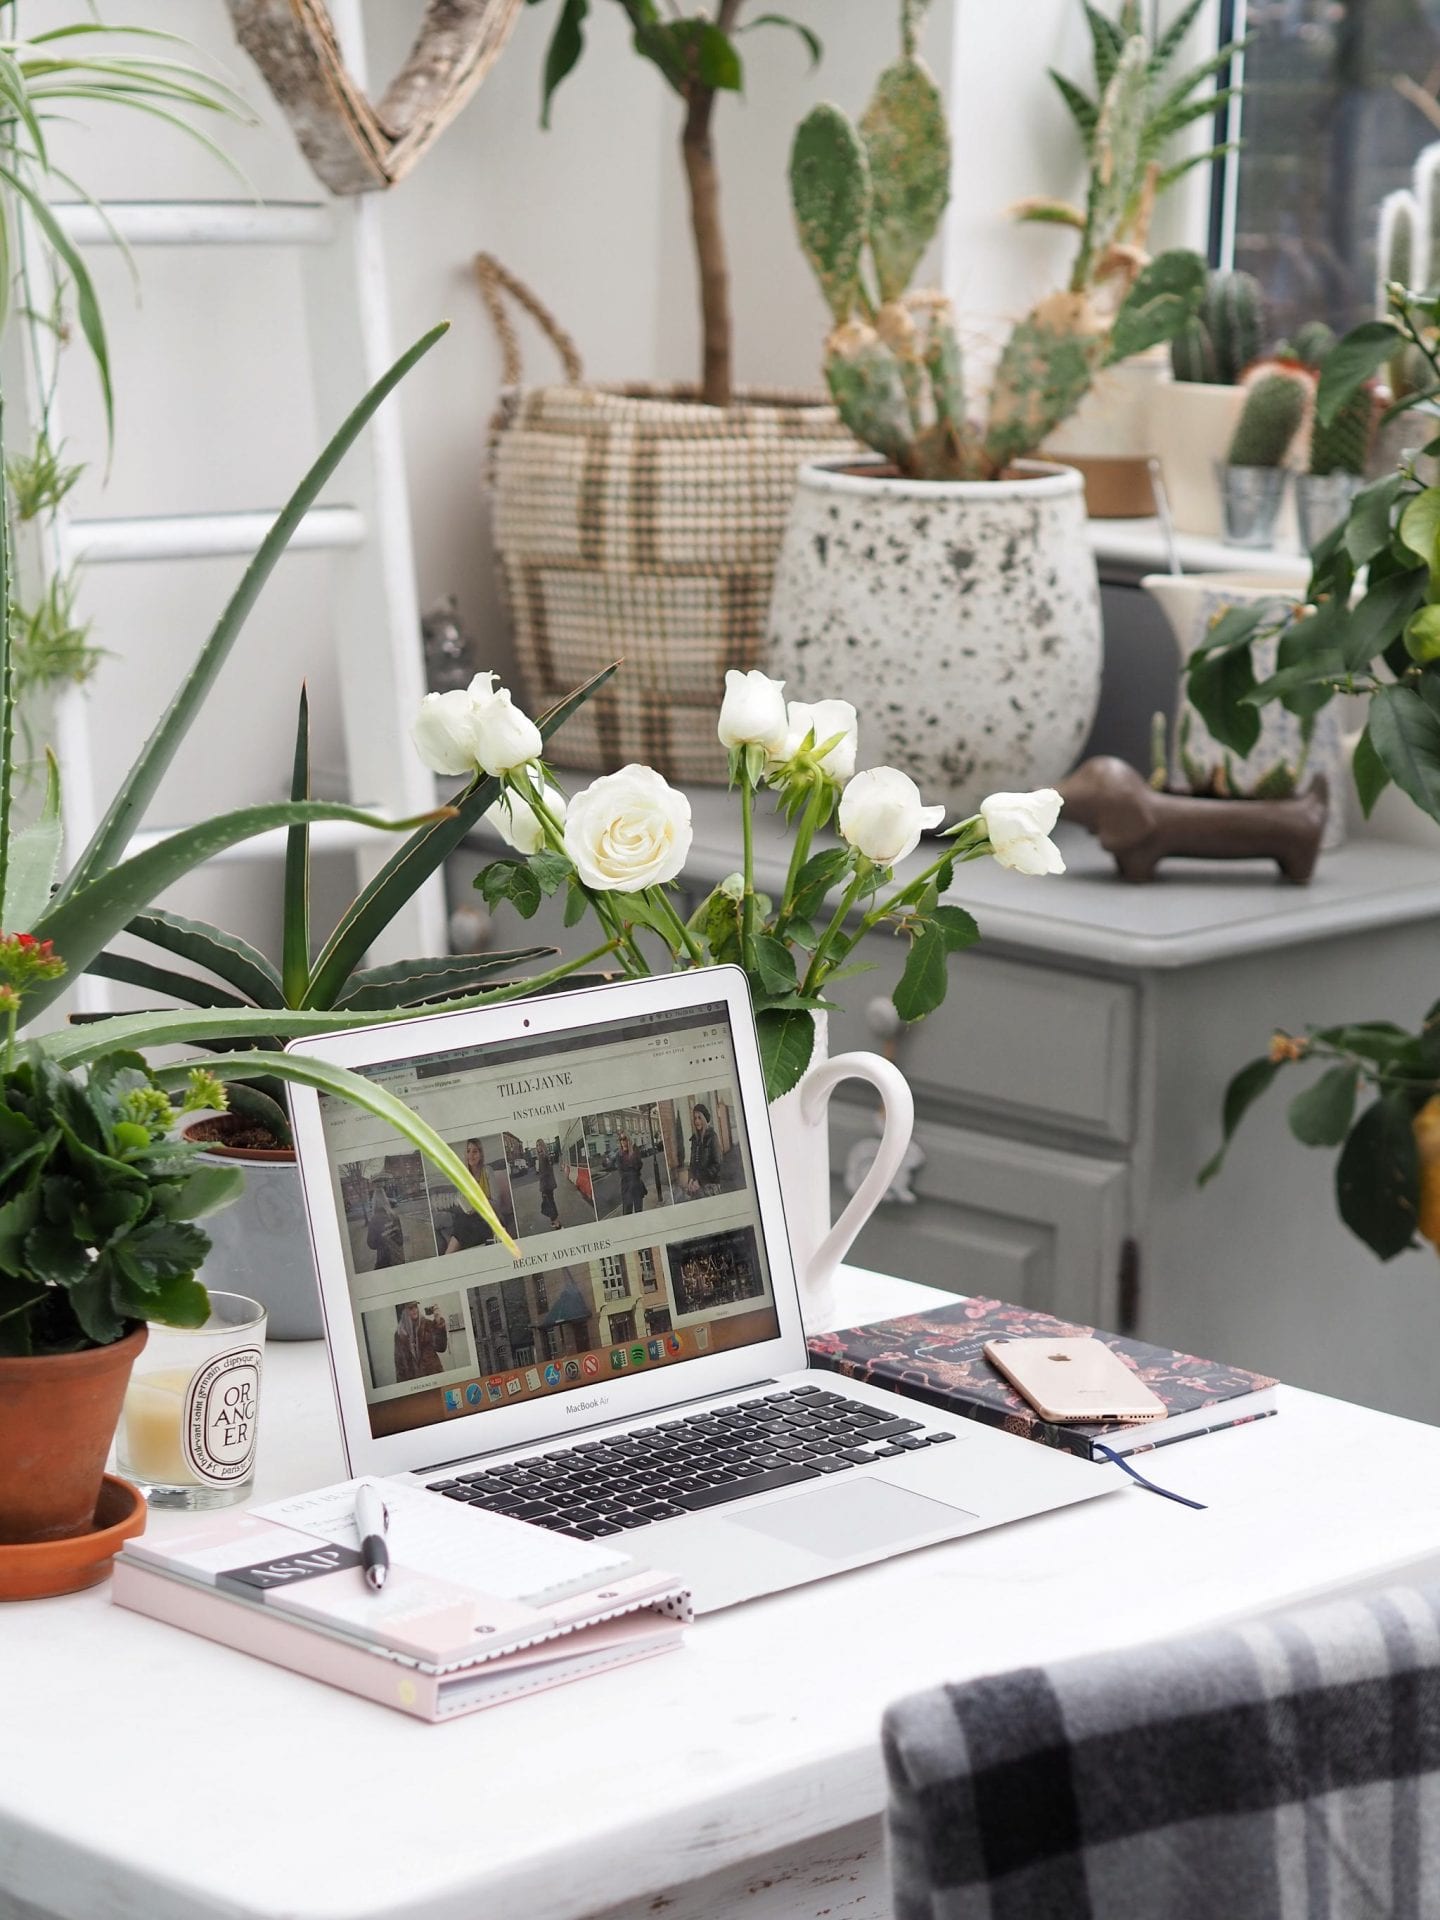 Inspiring home office tips - how to create a beautiful home office